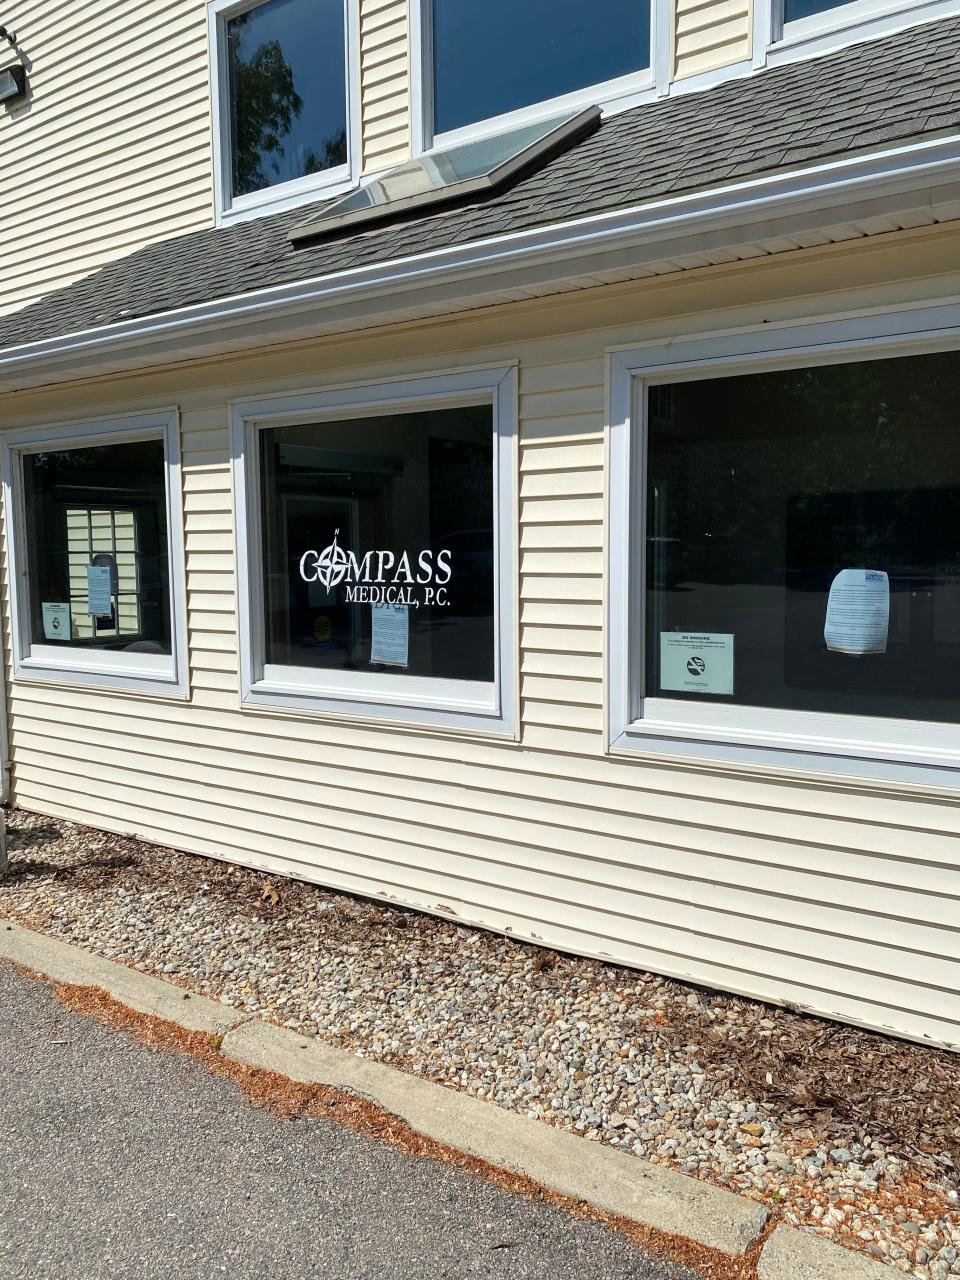 Compass Medical's Taunton facility, located at 152 Dean St., seen here on Thursday, June 1, 2023, closed down abruptly on May 31, 2023, along with every branch location.